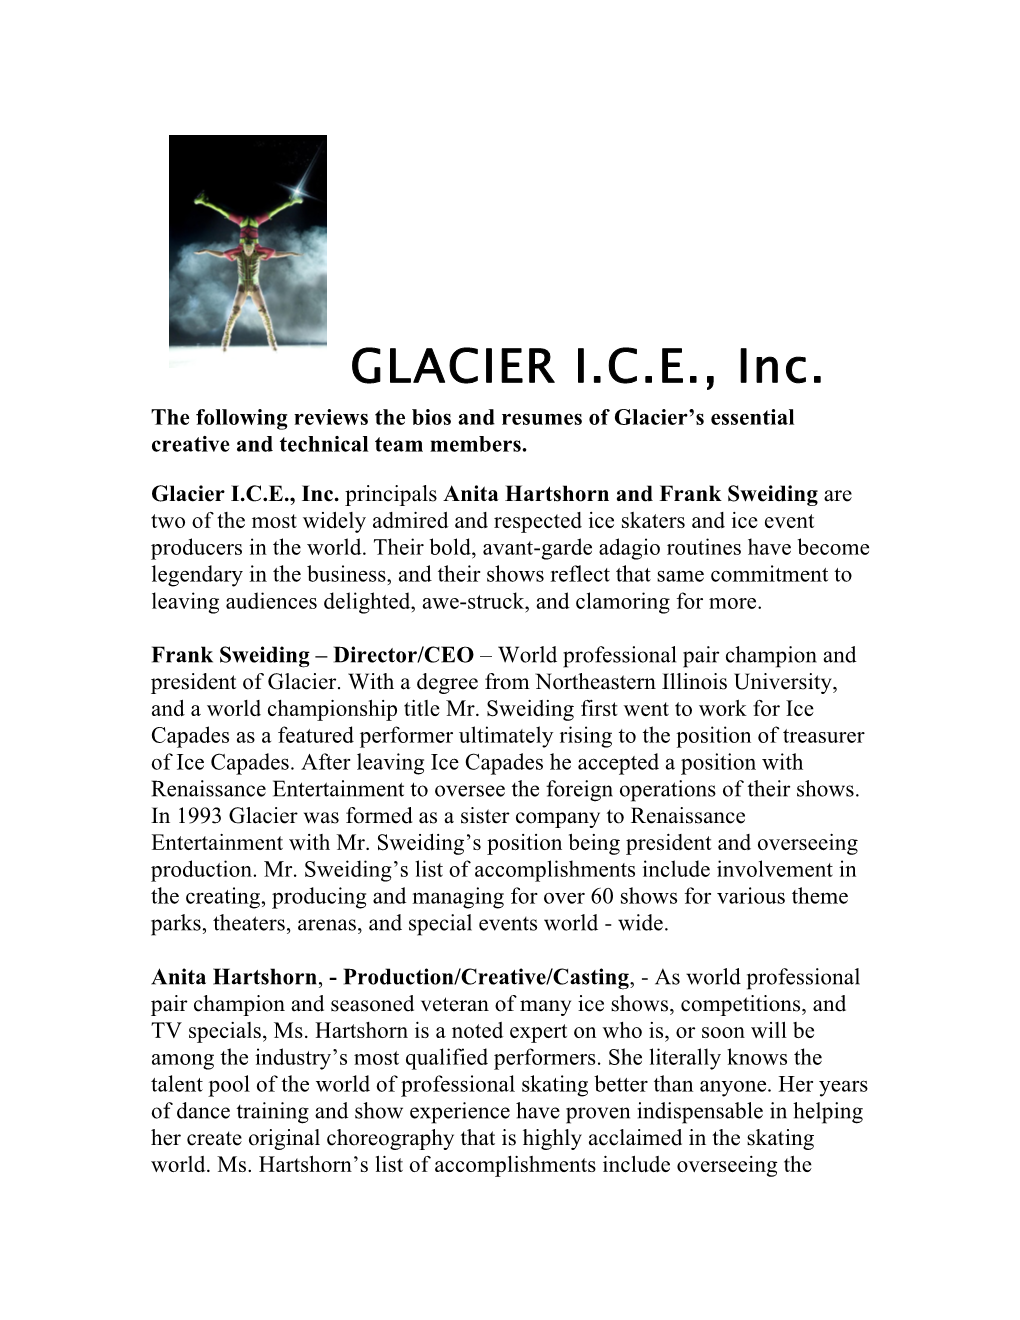 GLACIER I.C.E., Inc. the Following Reviews the Bios and Resumes of Glacier’S Essential Creative and Technical Team Members